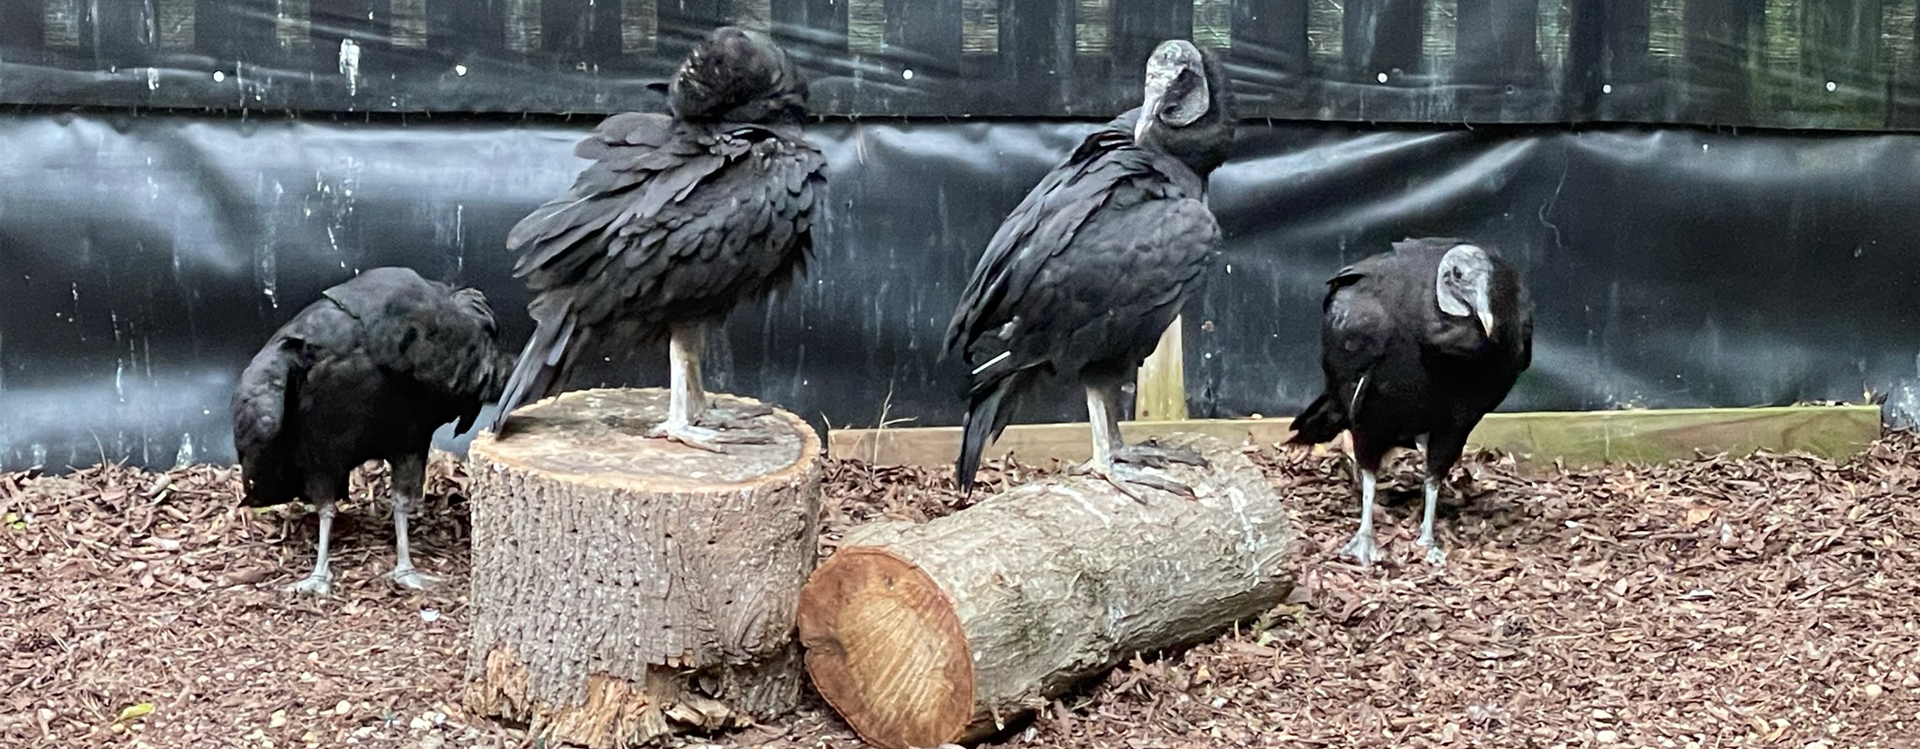 The Black Vultures preen their feathers immediately after being vaccinated.